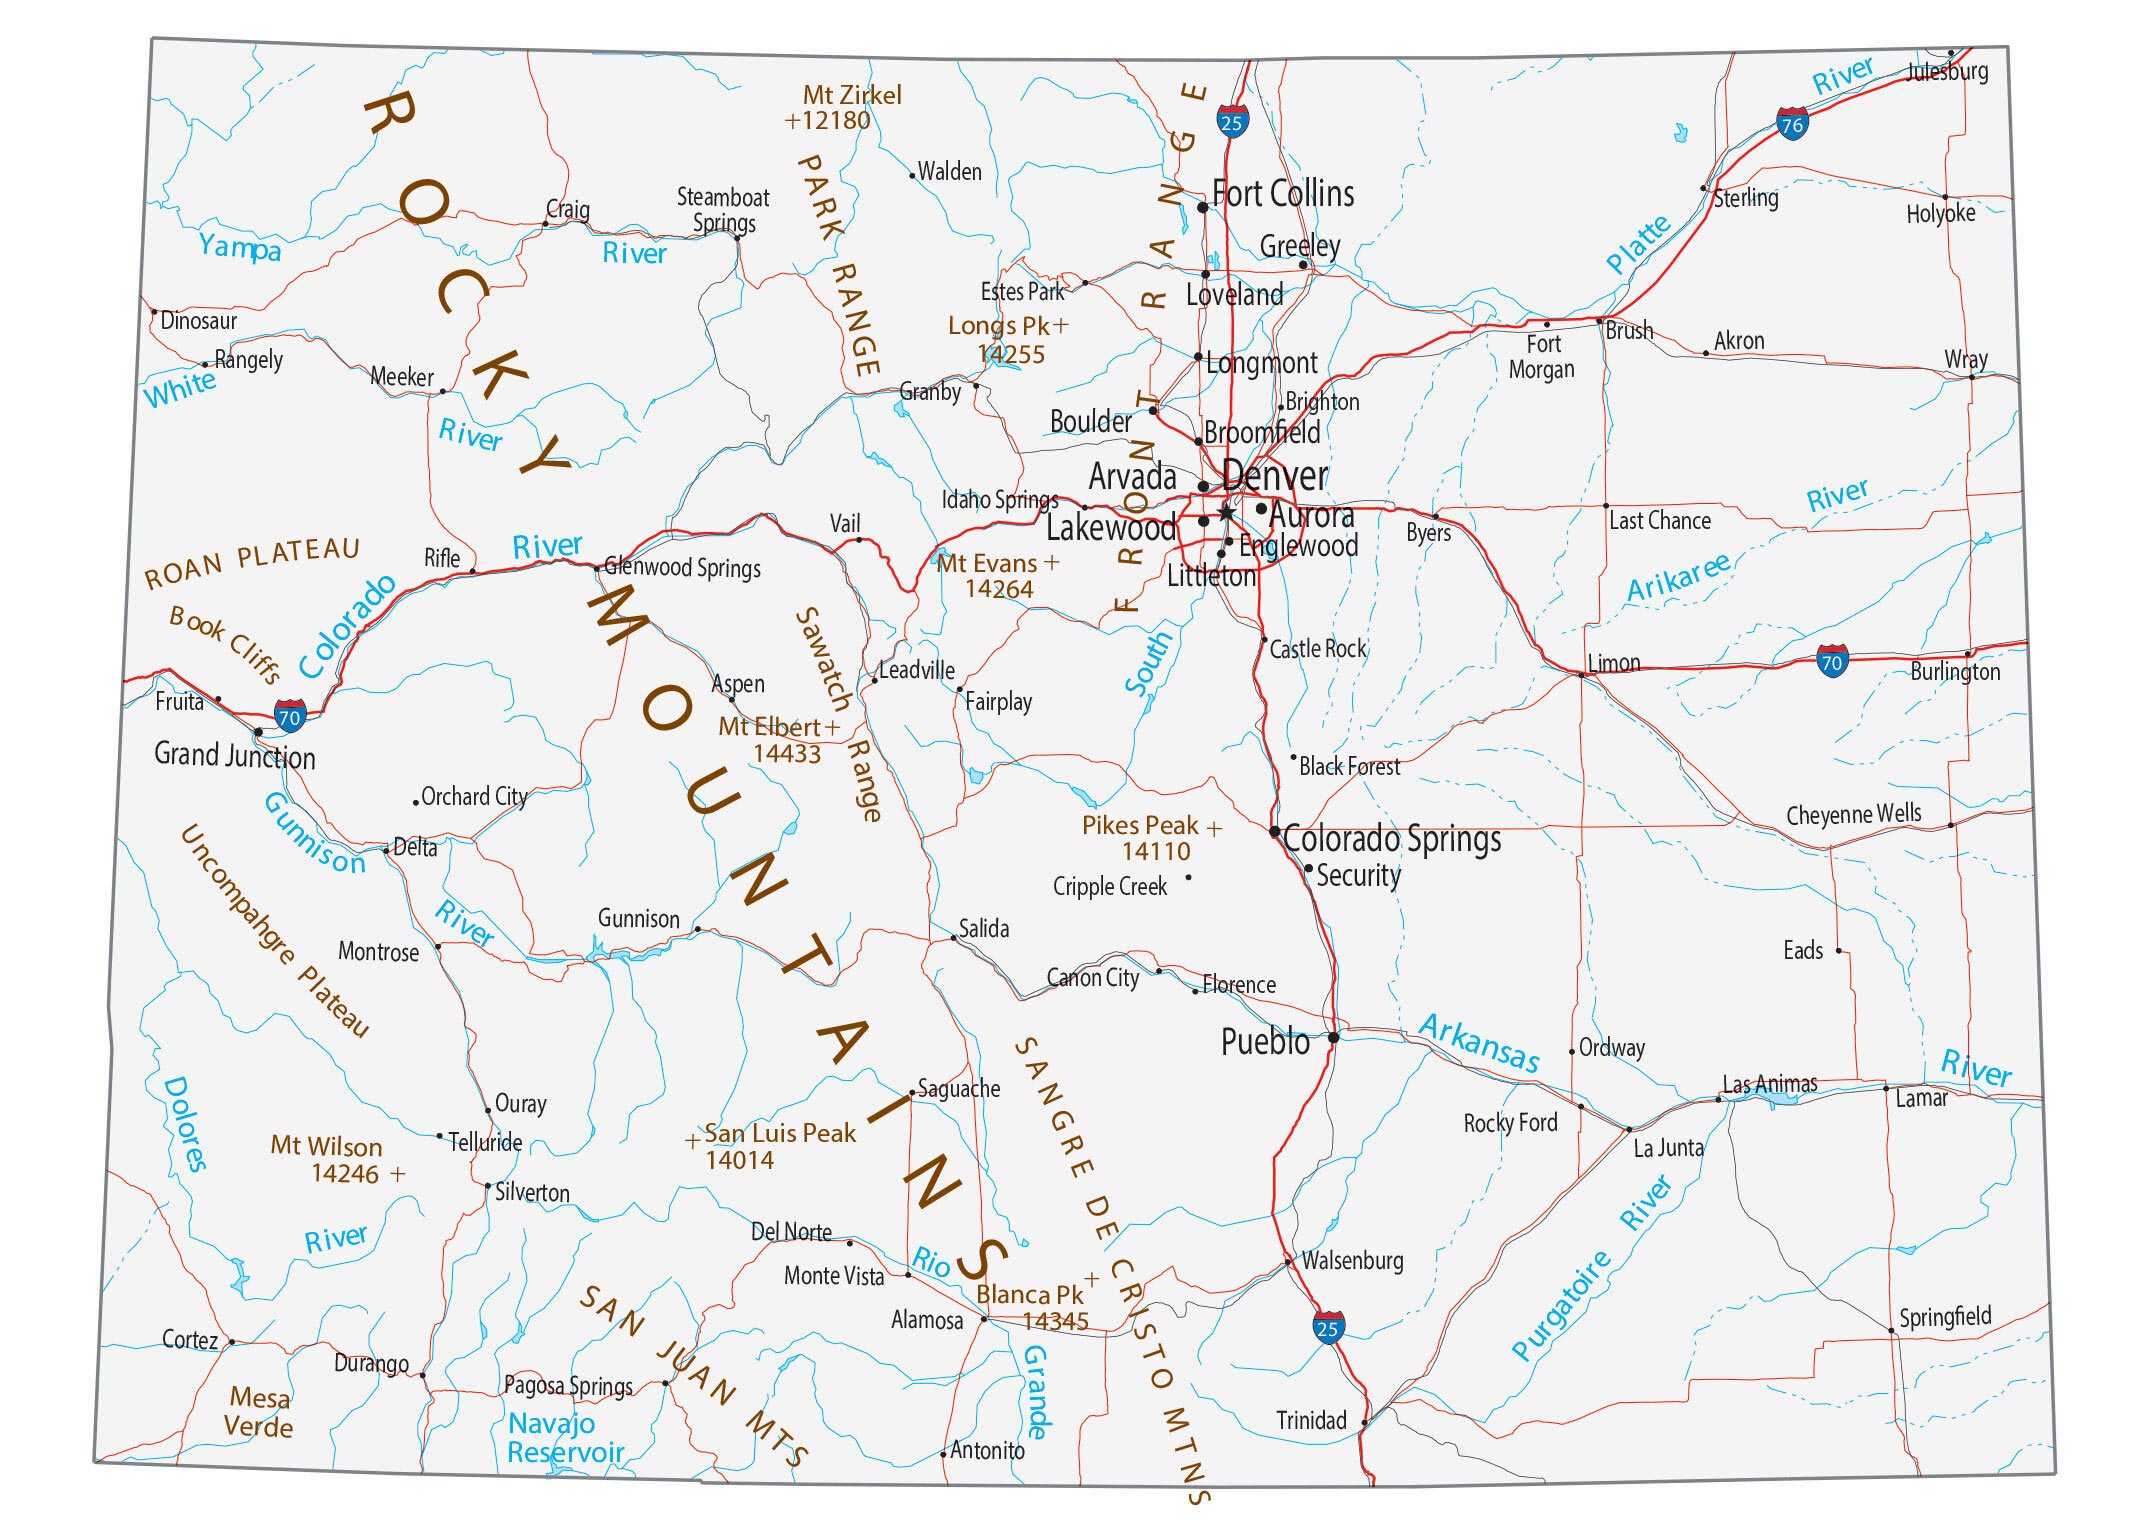 Large Map Of Colorado Map Of Colorado - Cities And Roads - Gis Geography